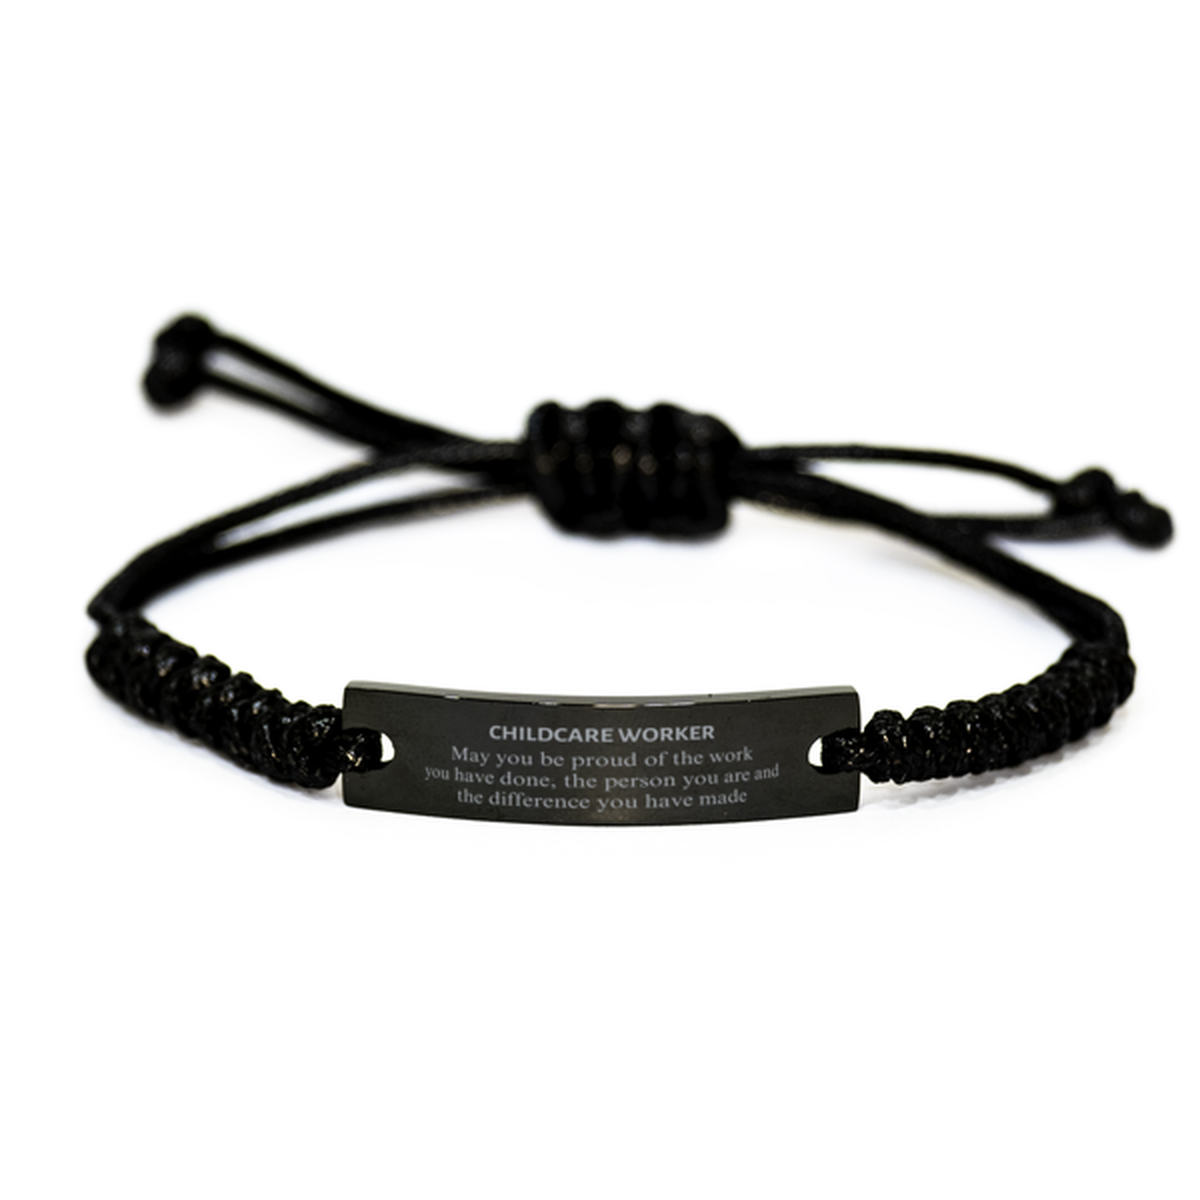 Childcare Worker May you be proud of the work you have done, Retirement Childcare Worker Black Rope Bracelet for Colleague Appreciation Gifts Amazing for Childcare Worker